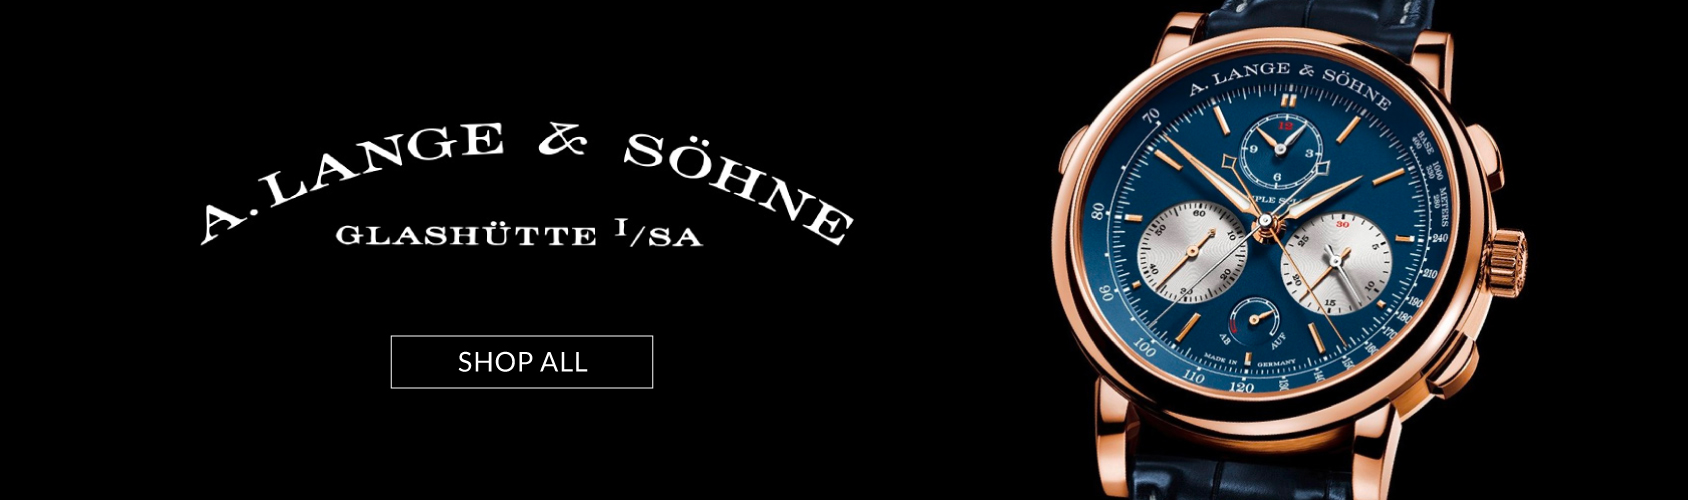 A Lange & Sohne Watches